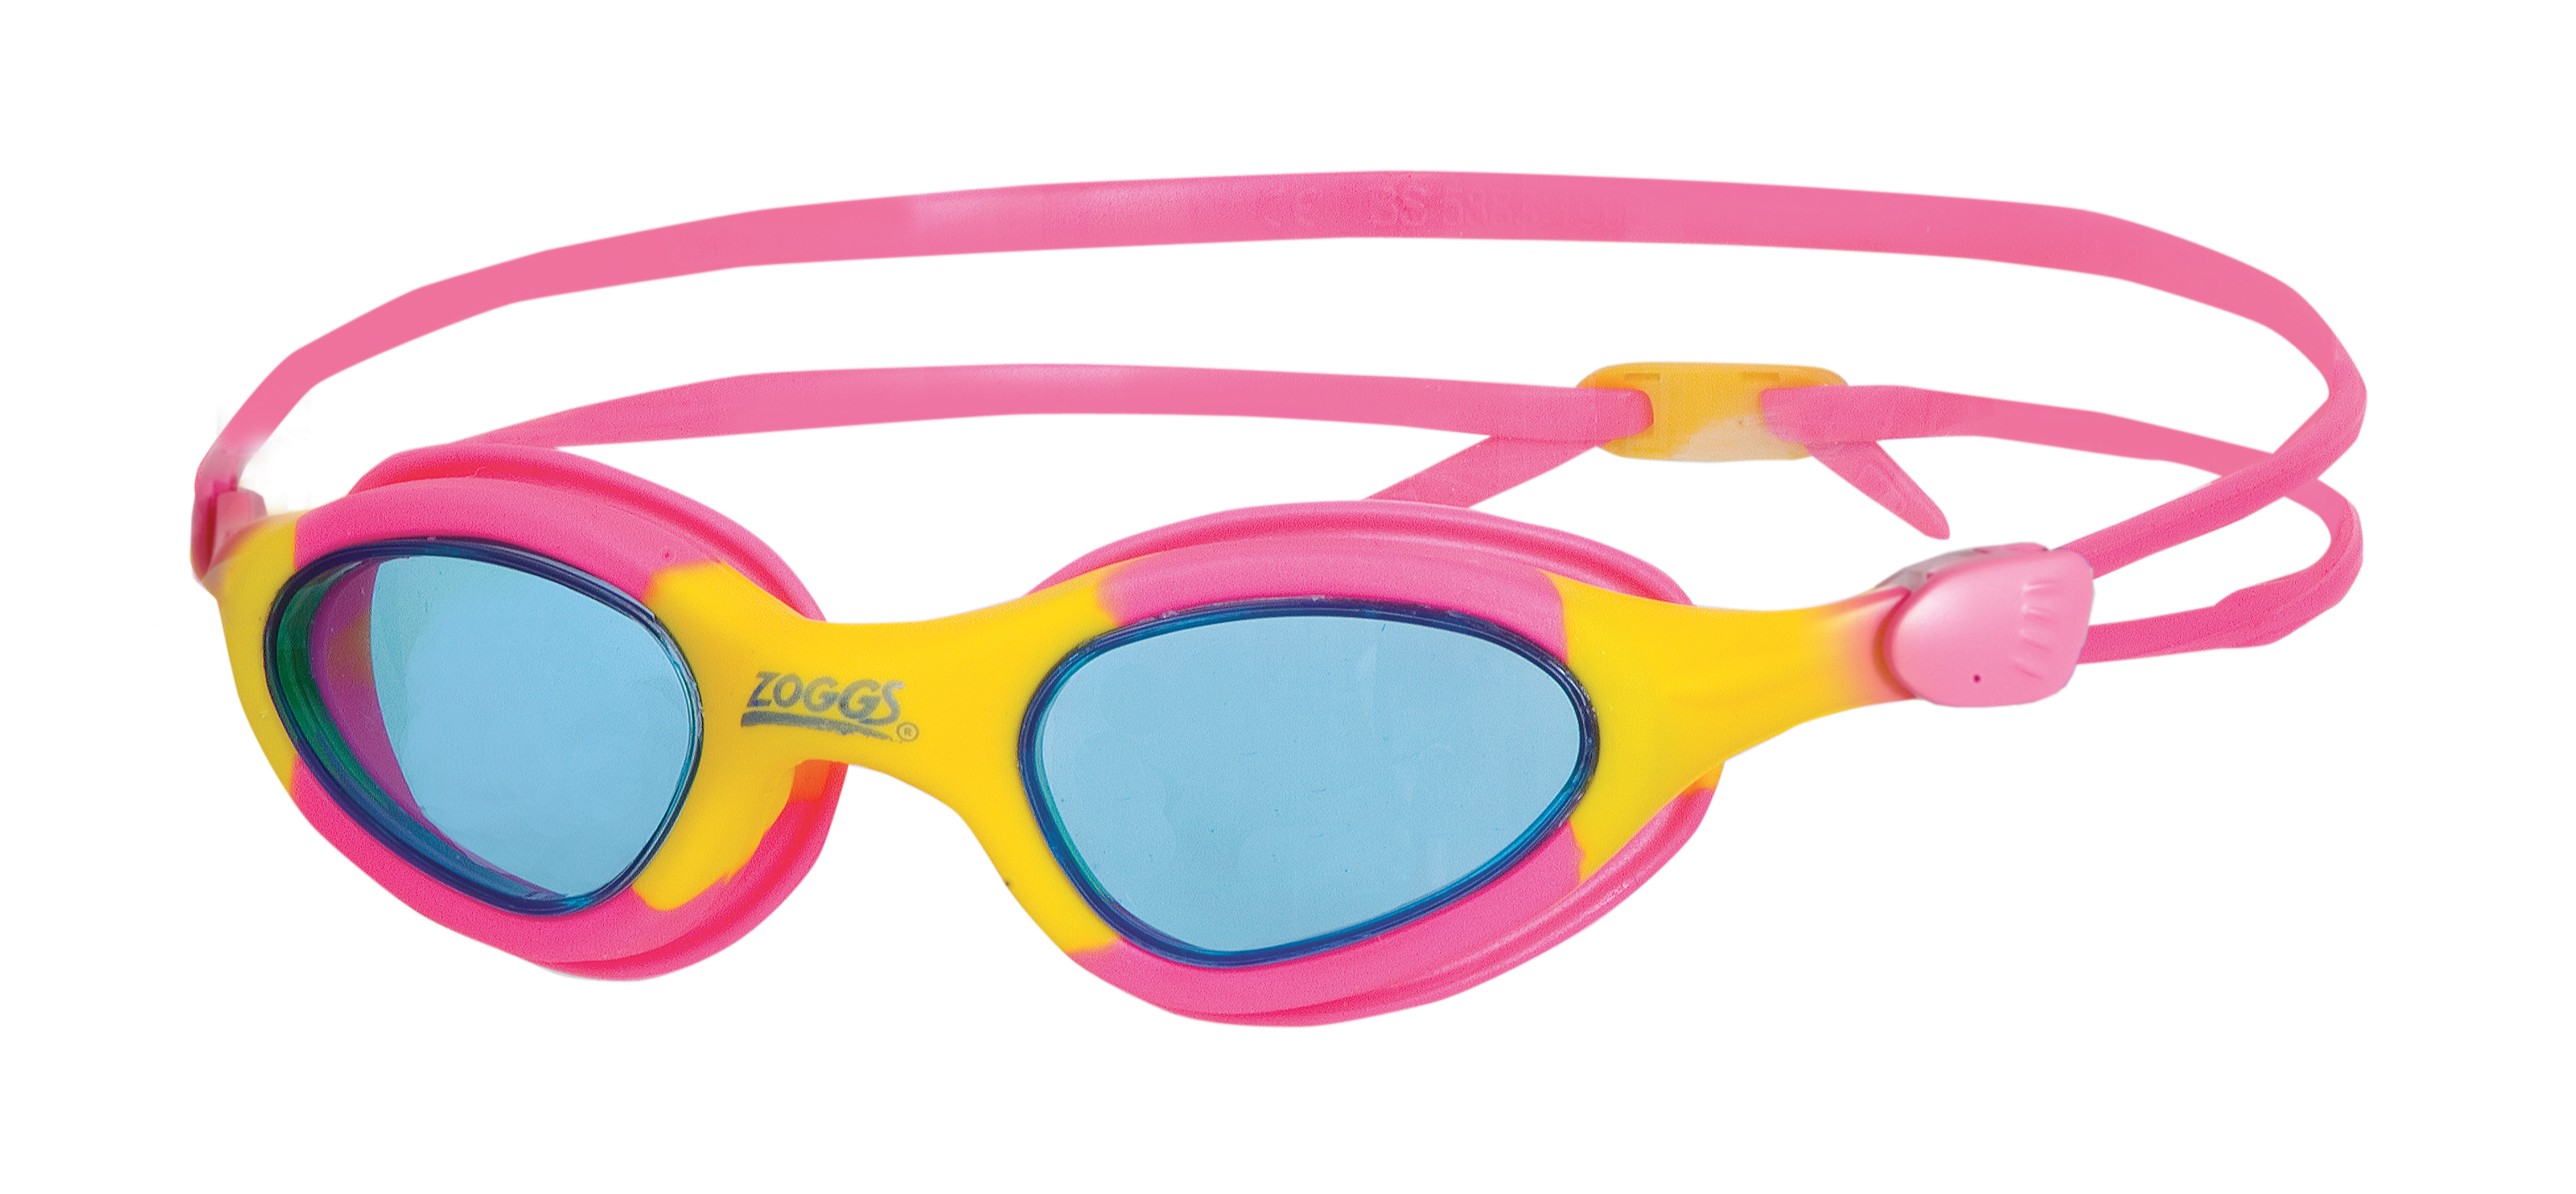 Swim Cap And Goggles Clipart Images   Crazy Gallery